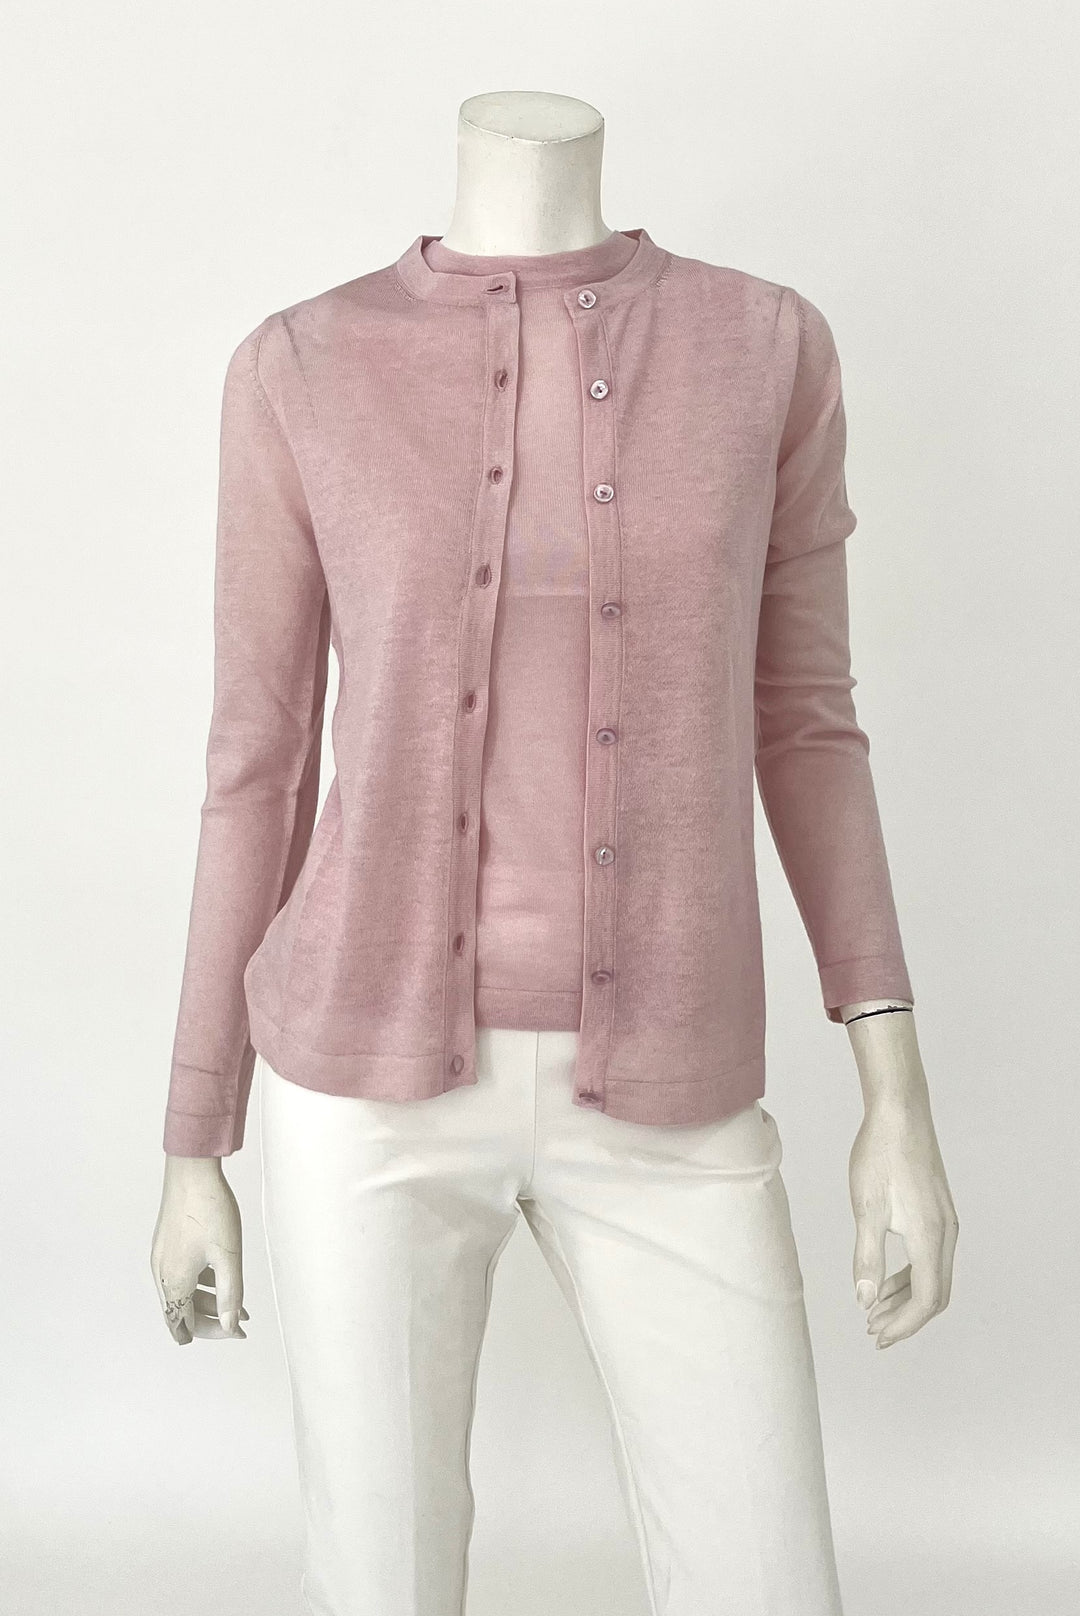 Eloise Collection in Linen and Cashmere Blend